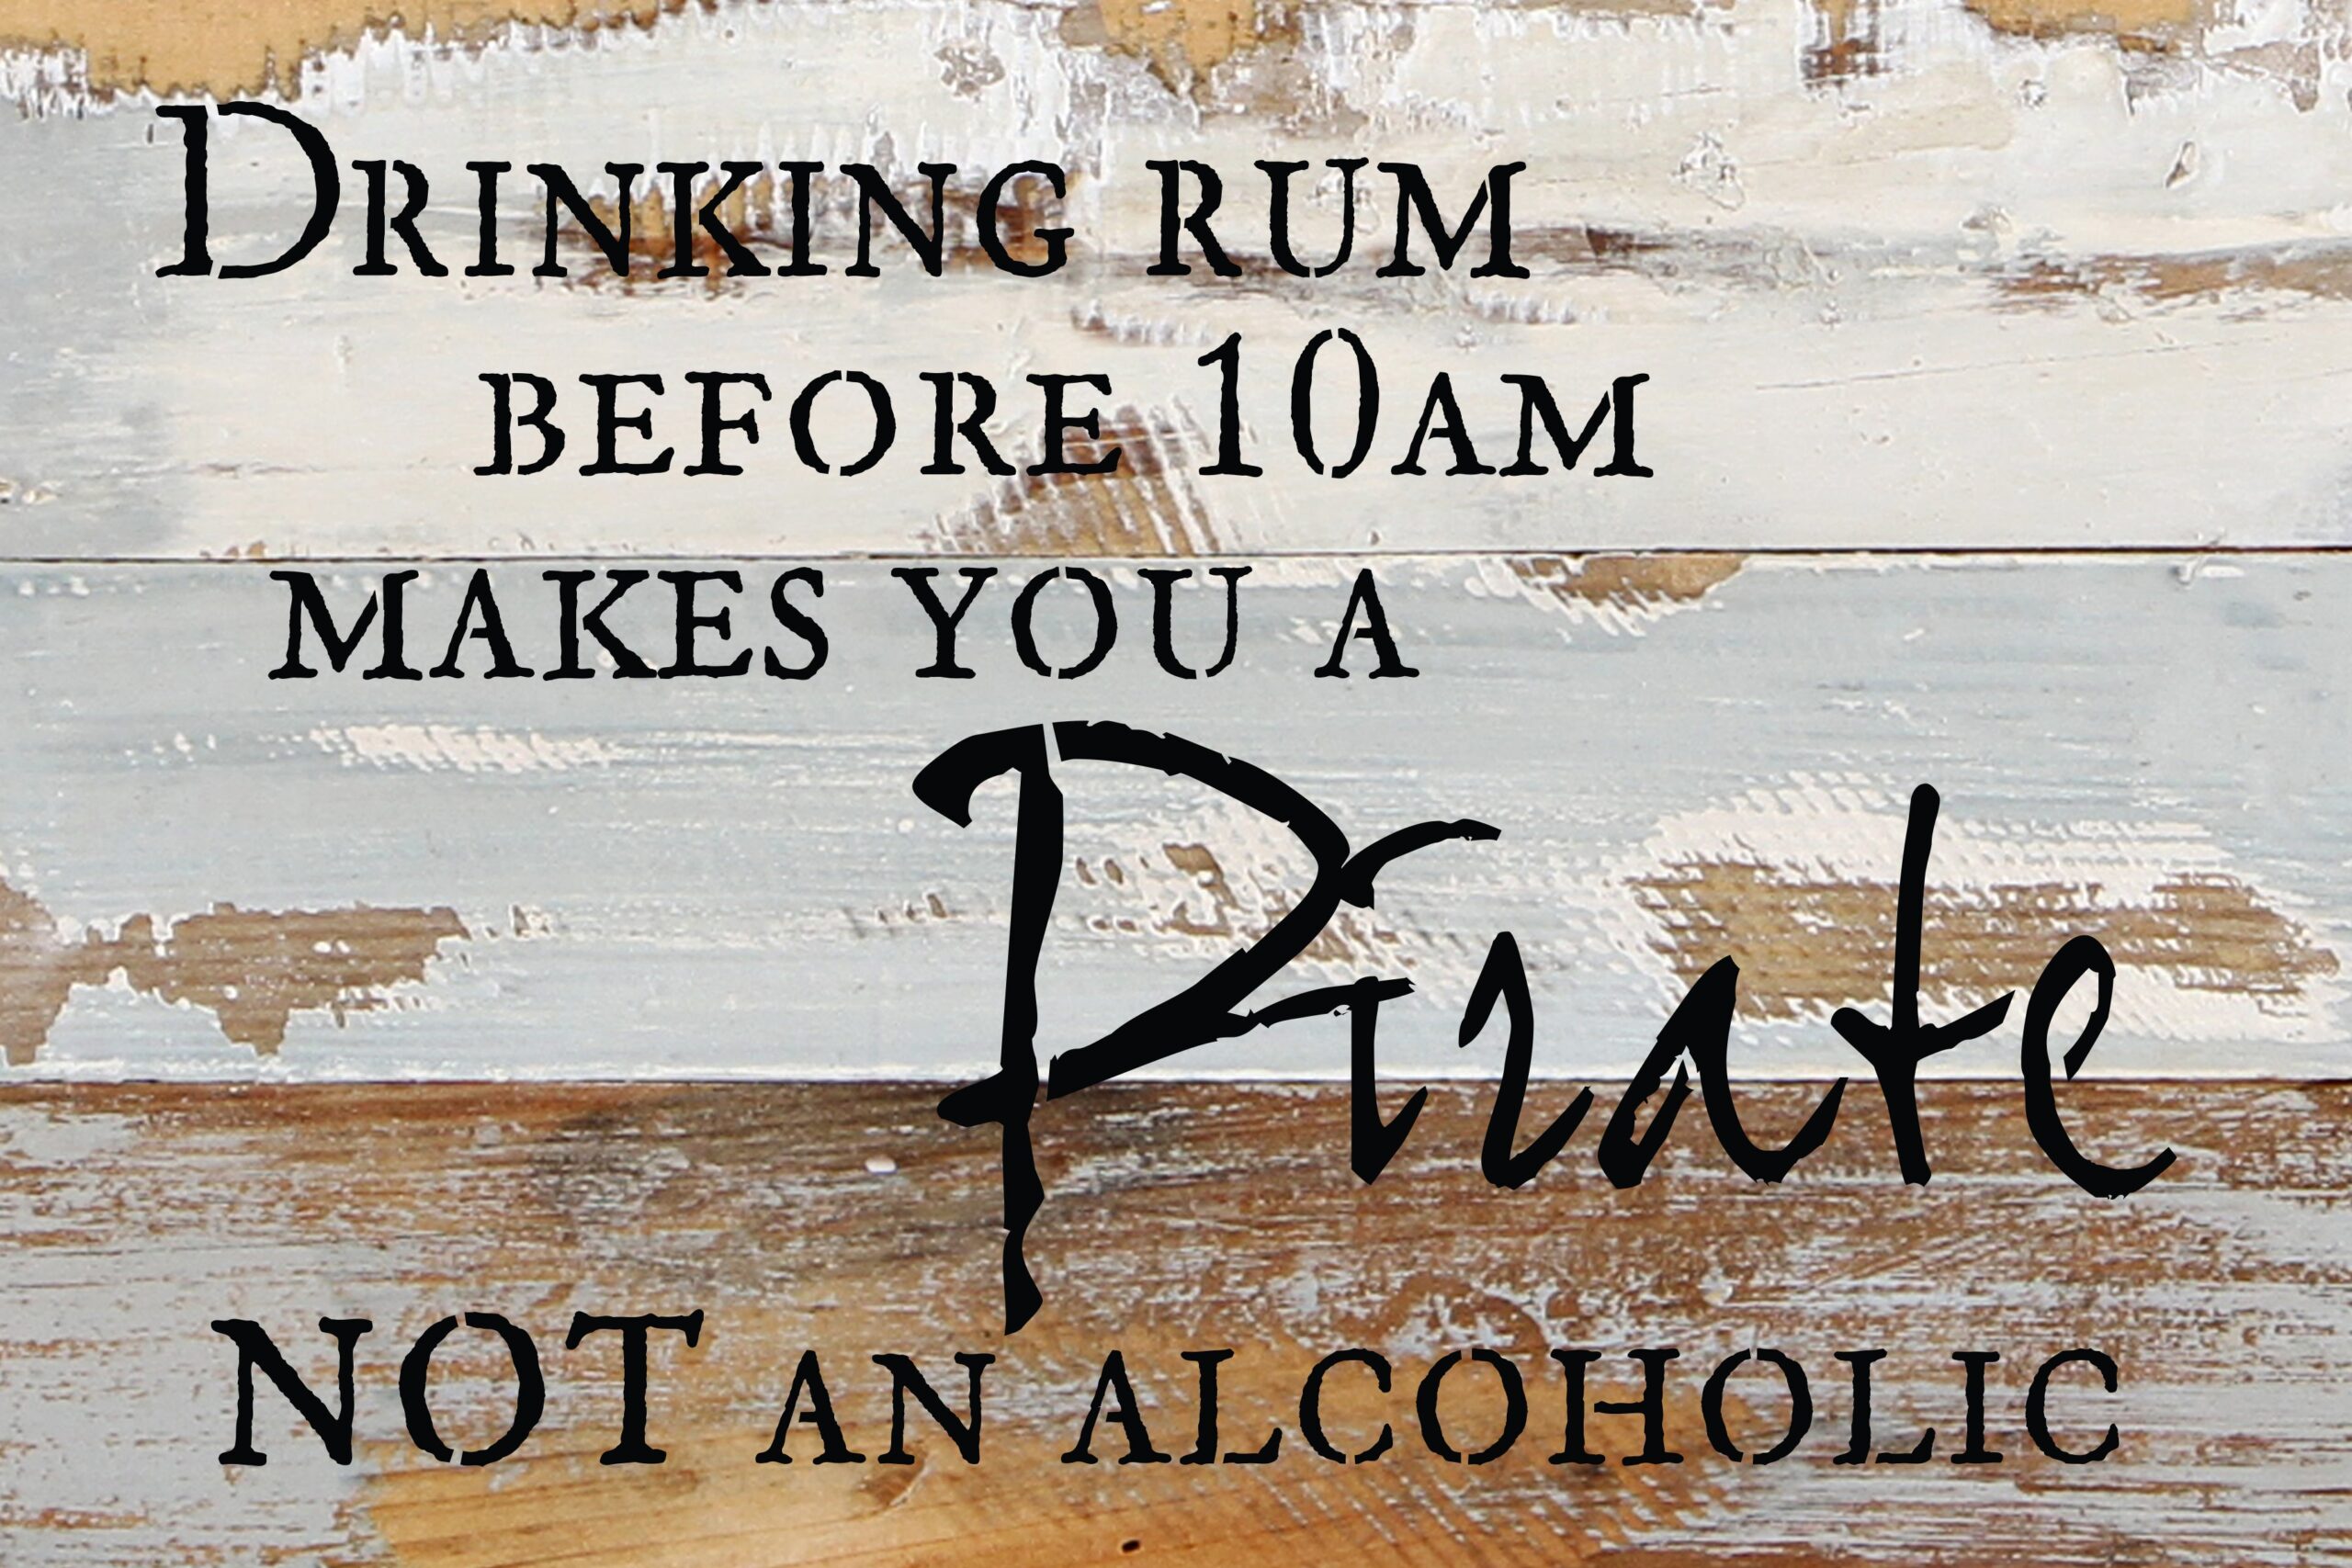 Drinking rum before 10AM makes you a pirate, not an alcoholic / 12x8 Reclaimed Wood Wall Art